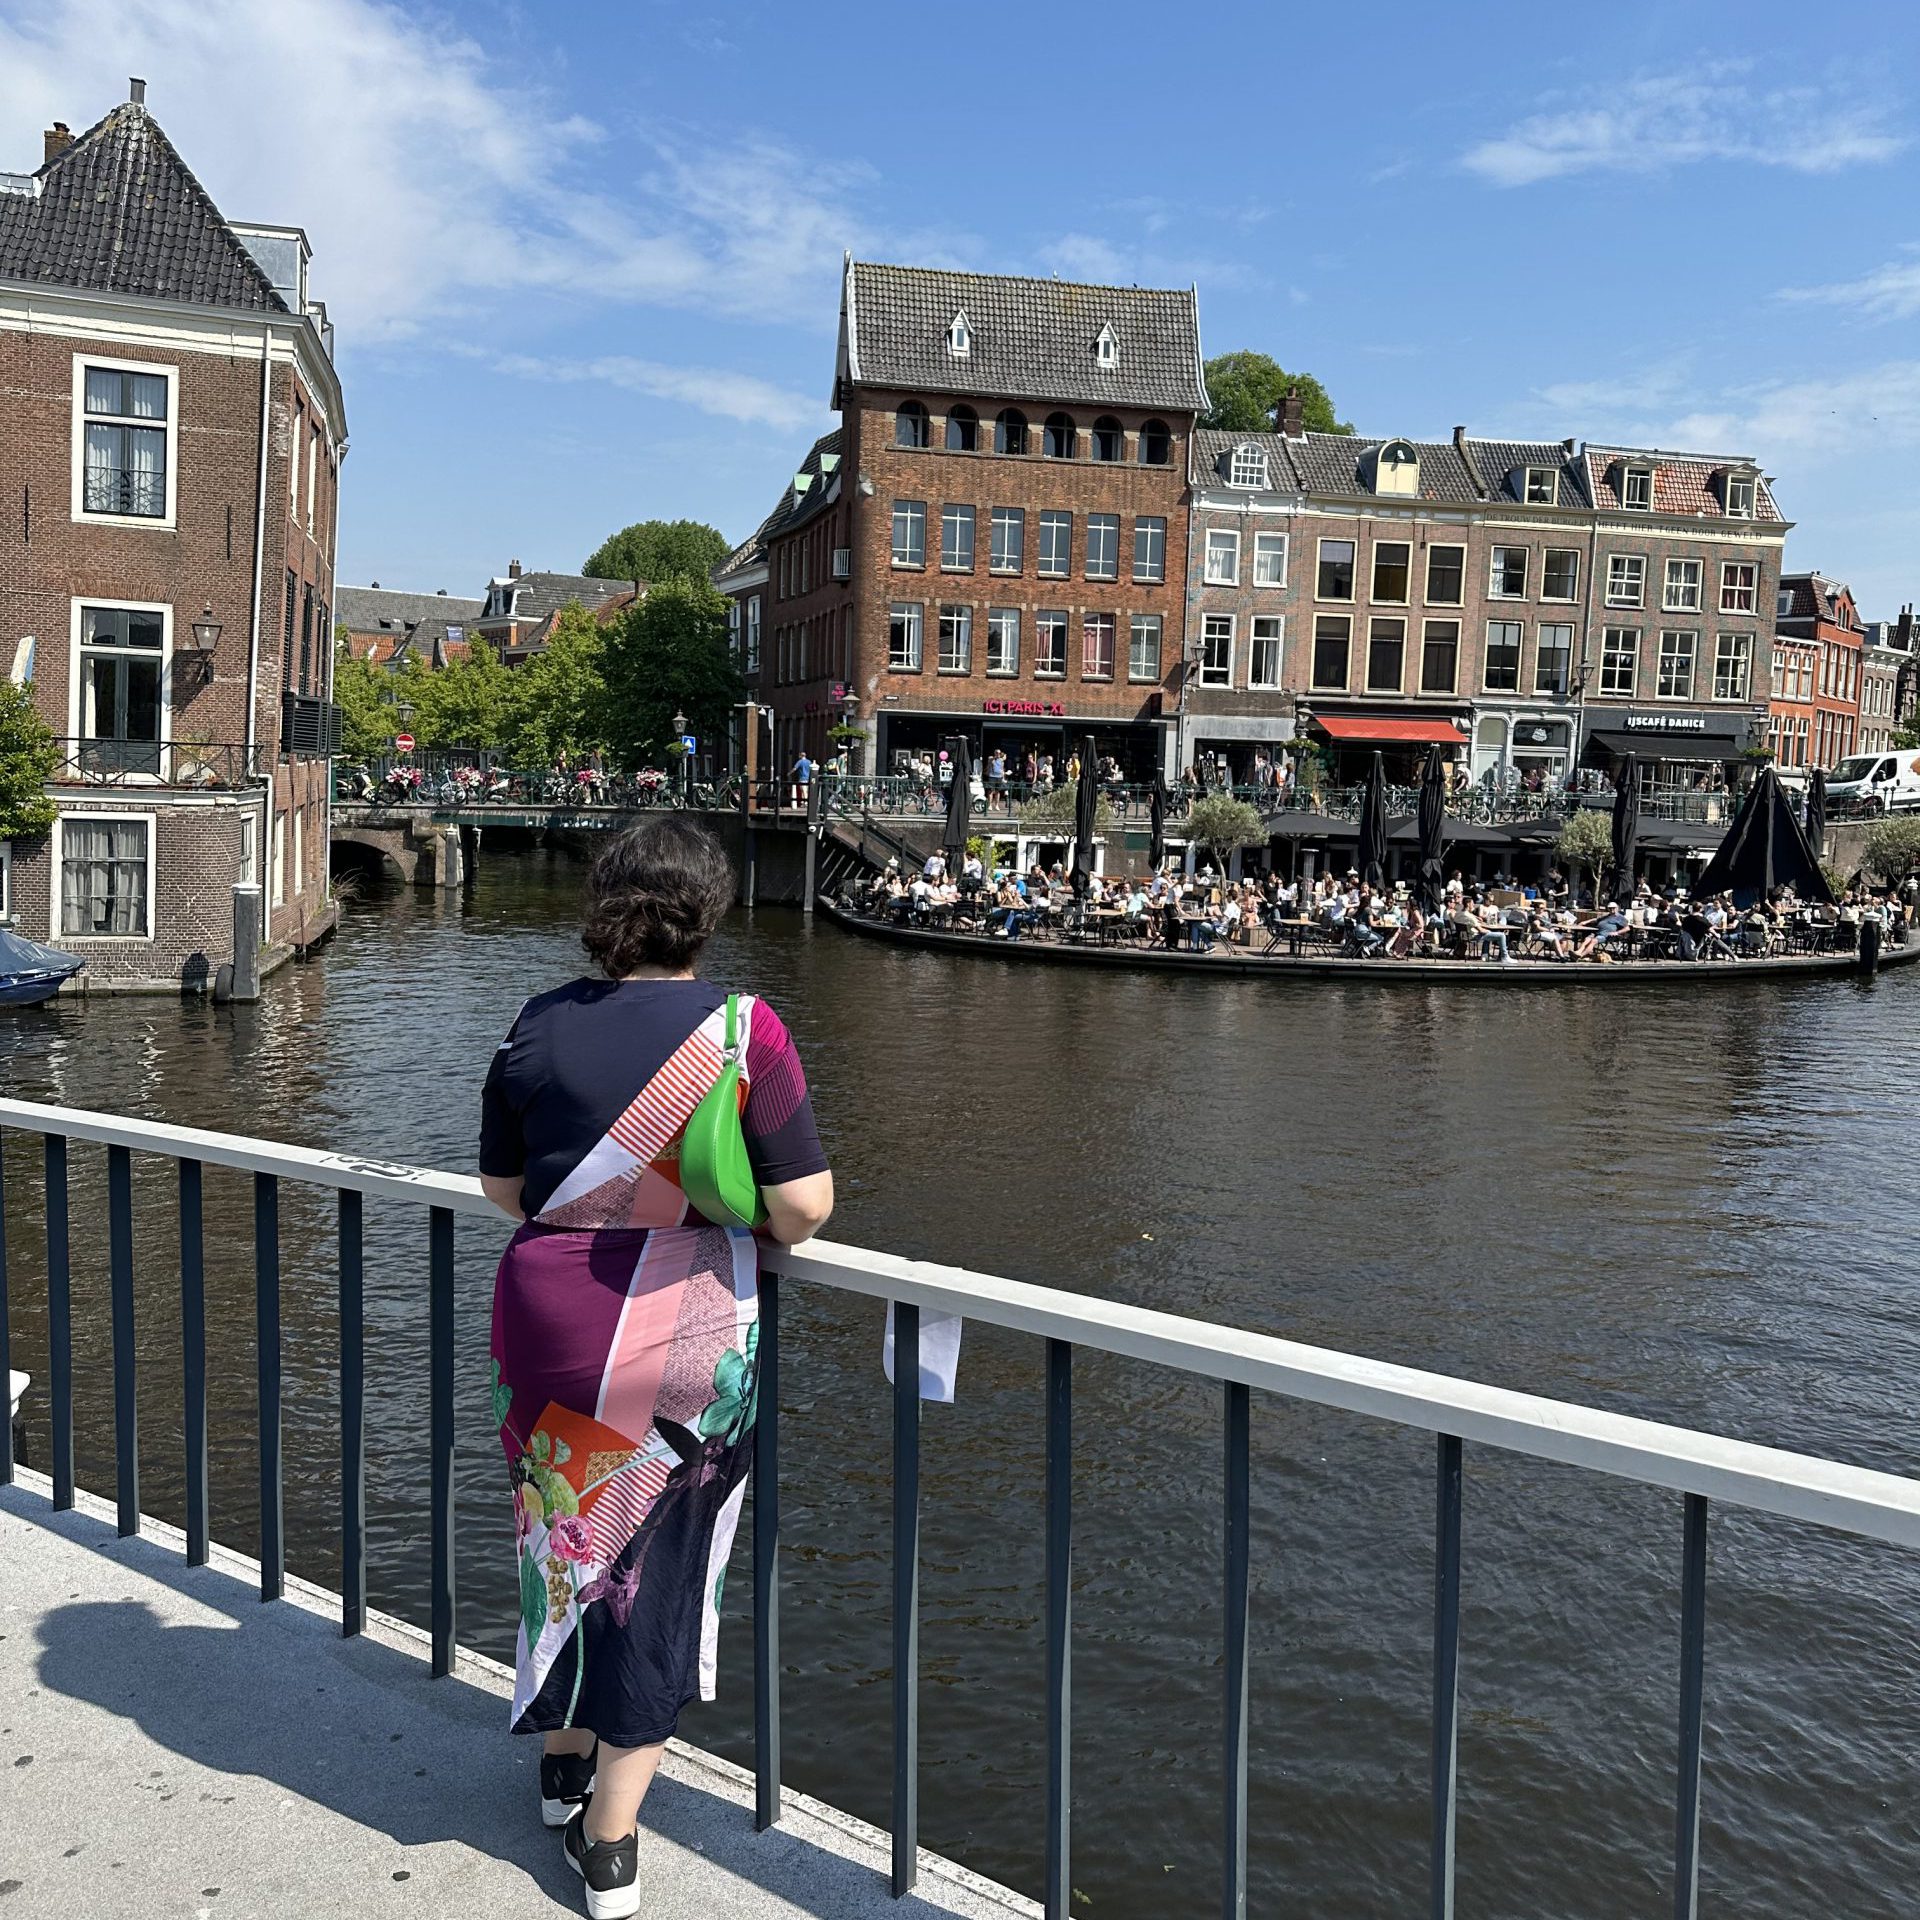 Part 2: 6 Pros and Cons of Living in the Netherlands